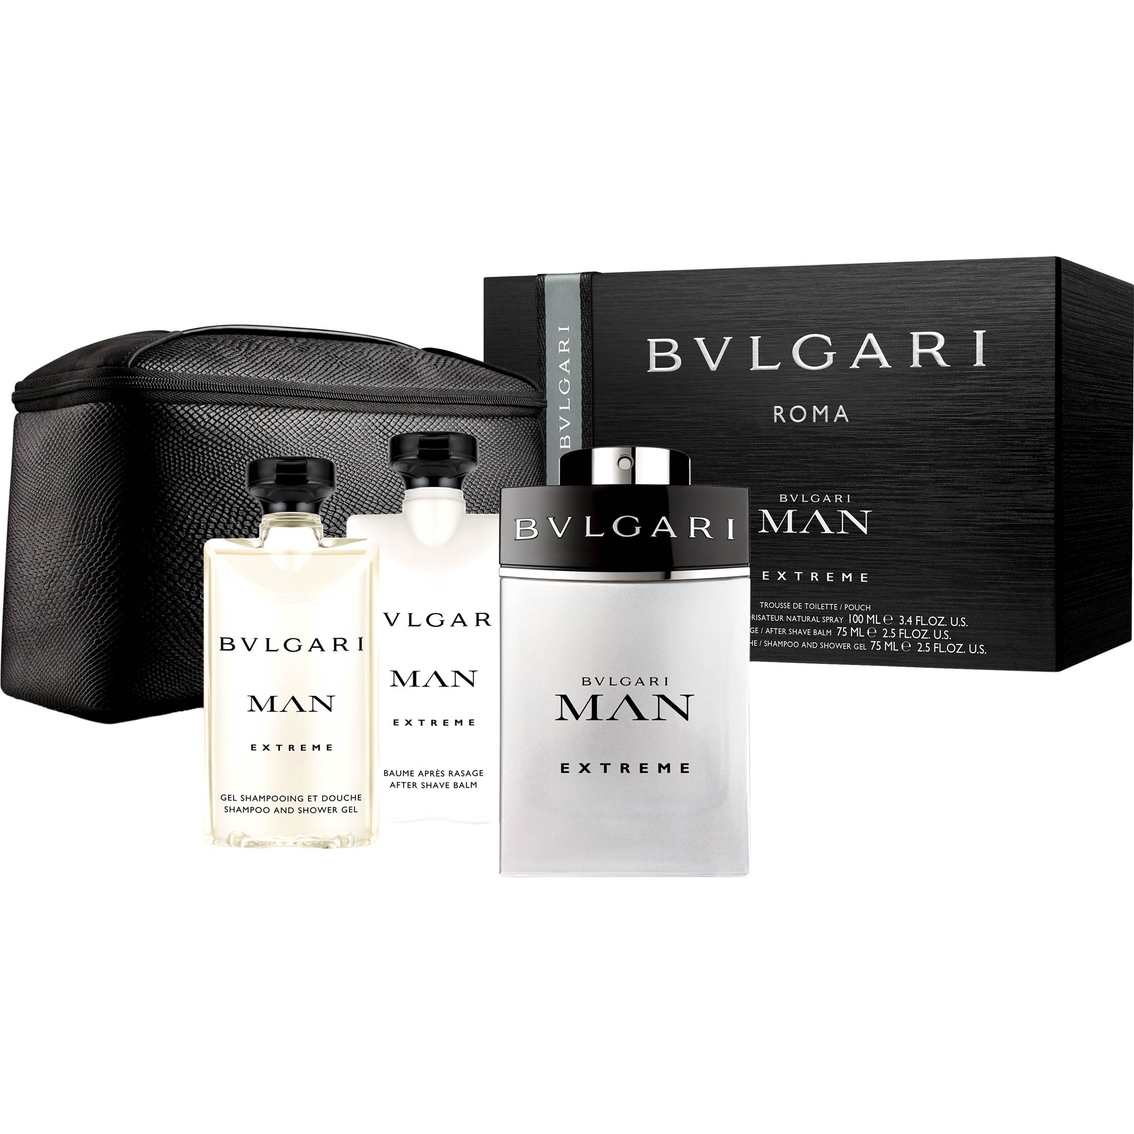 bvlgari extreme aftershave